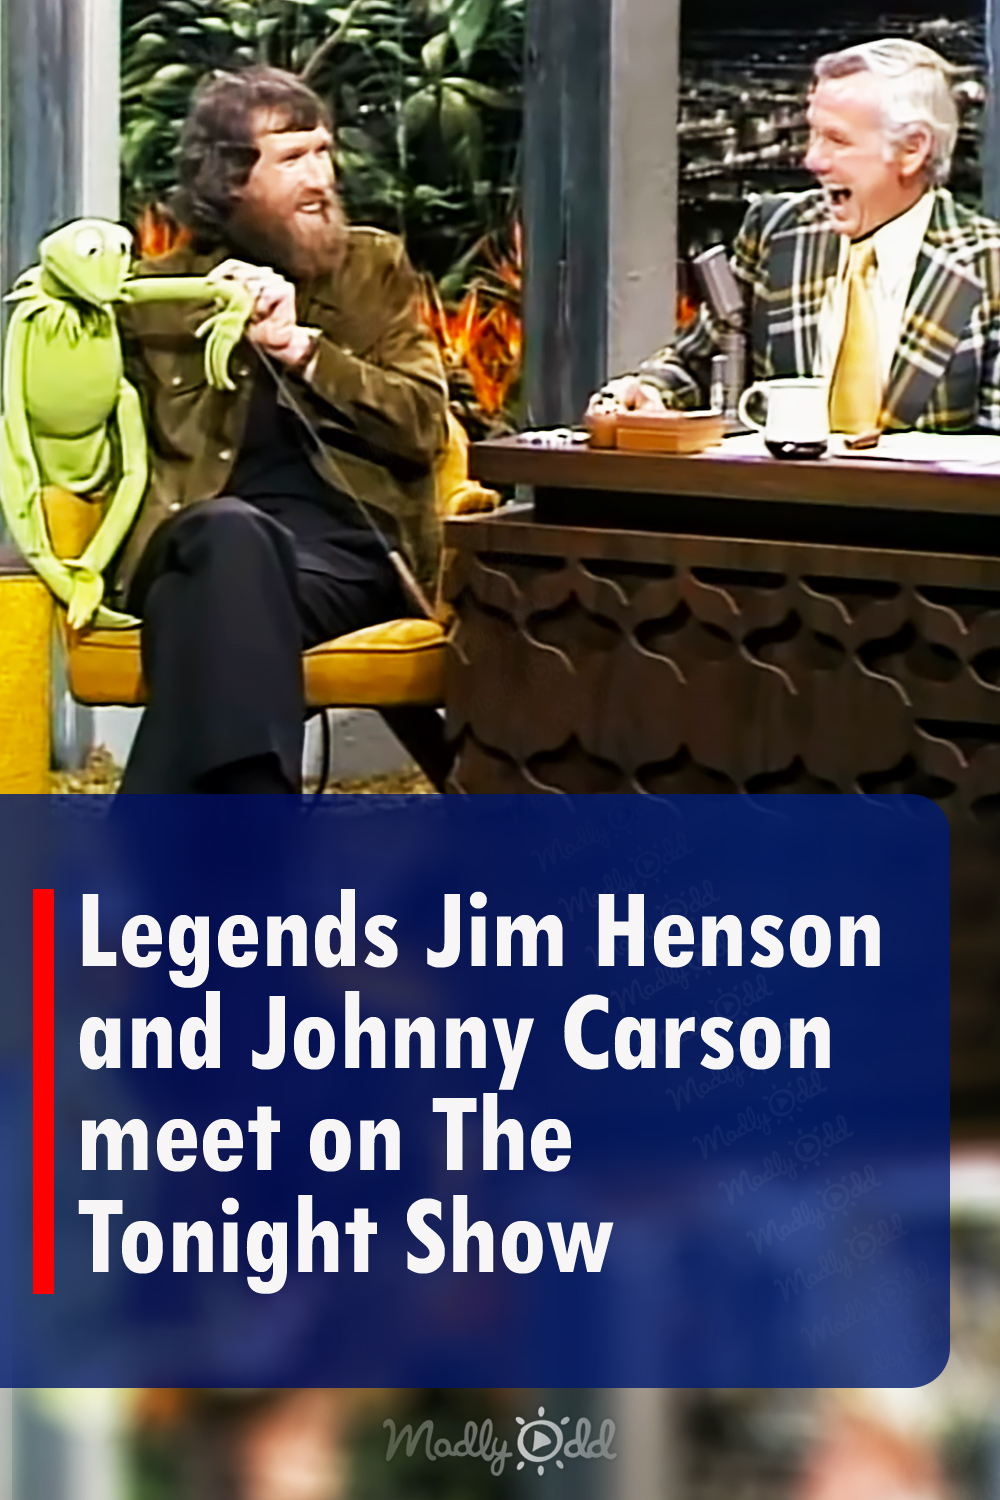 Legends Jim Henson and Johnny Carson meet on The Tonight Show